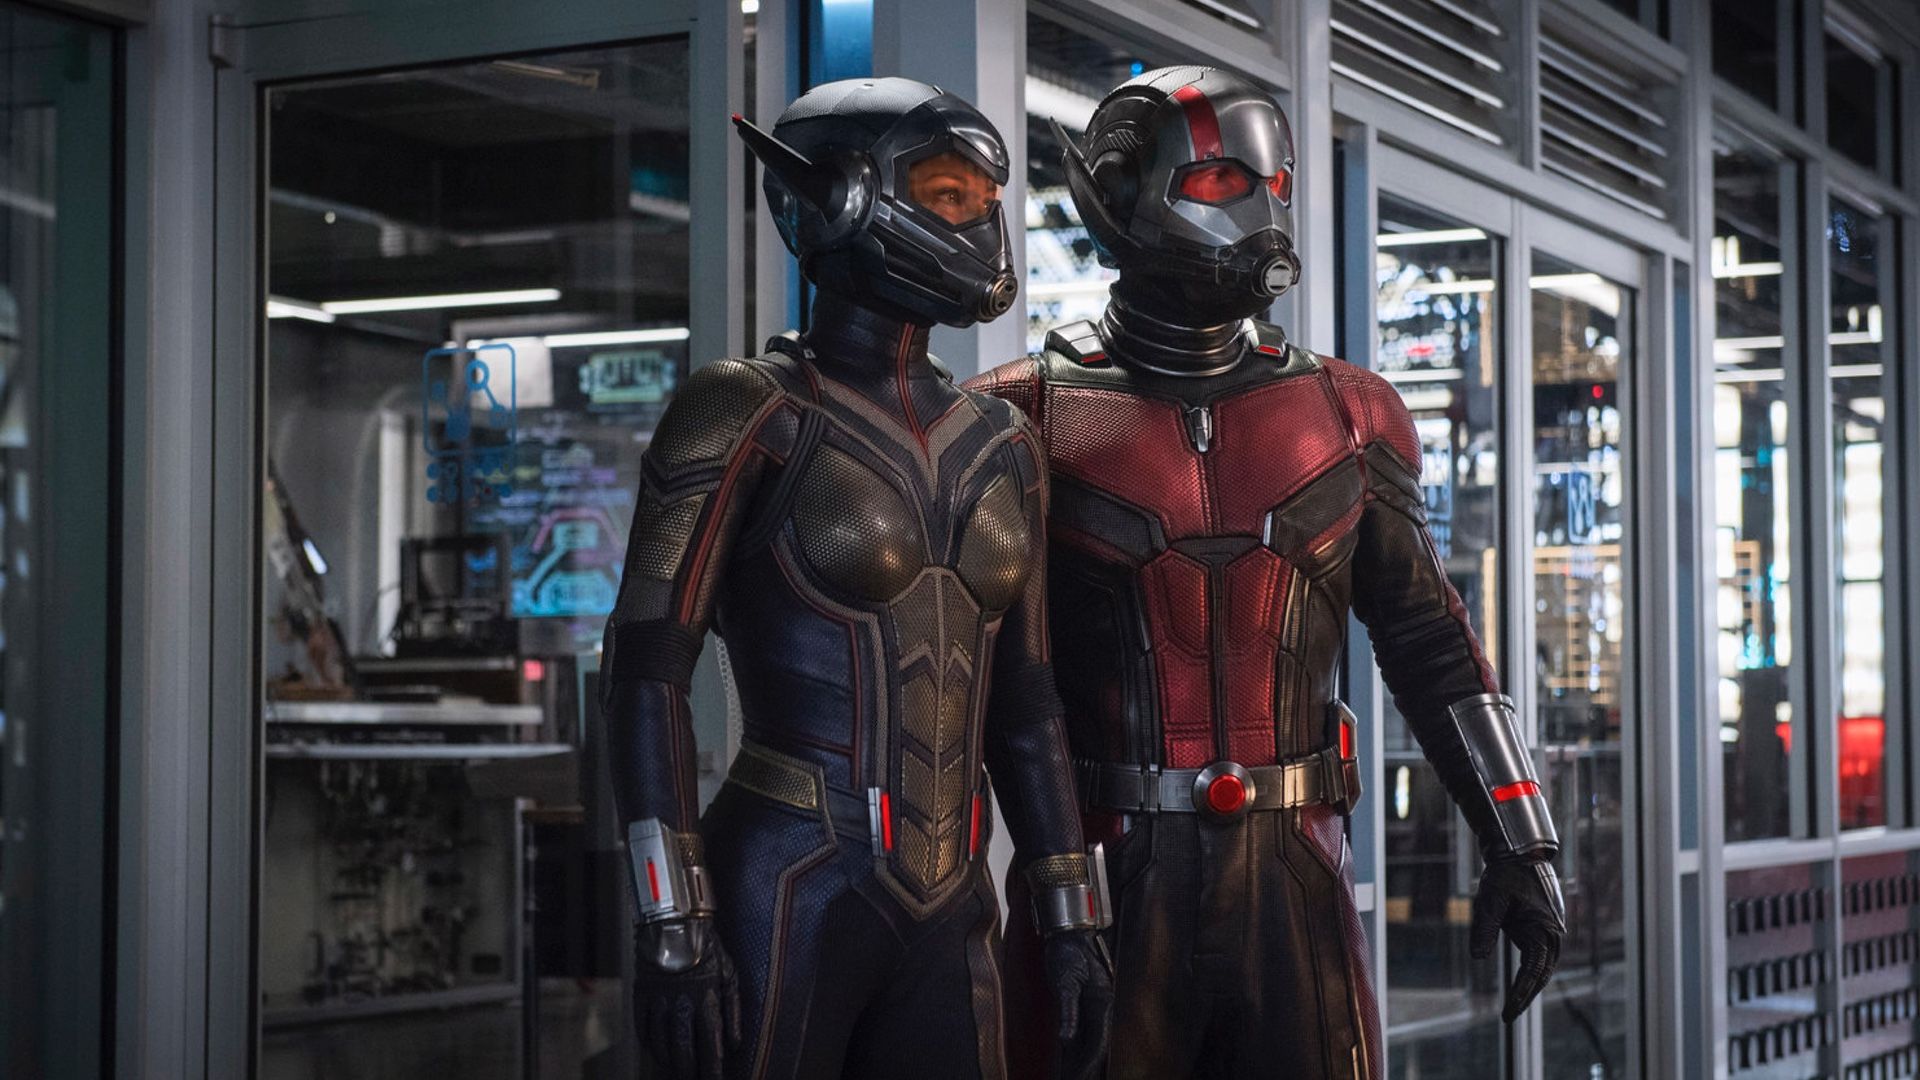 The Wasp's Suit In ANT MAN AND THE WASP Draws Up Controversy Due To Sexual Imagery